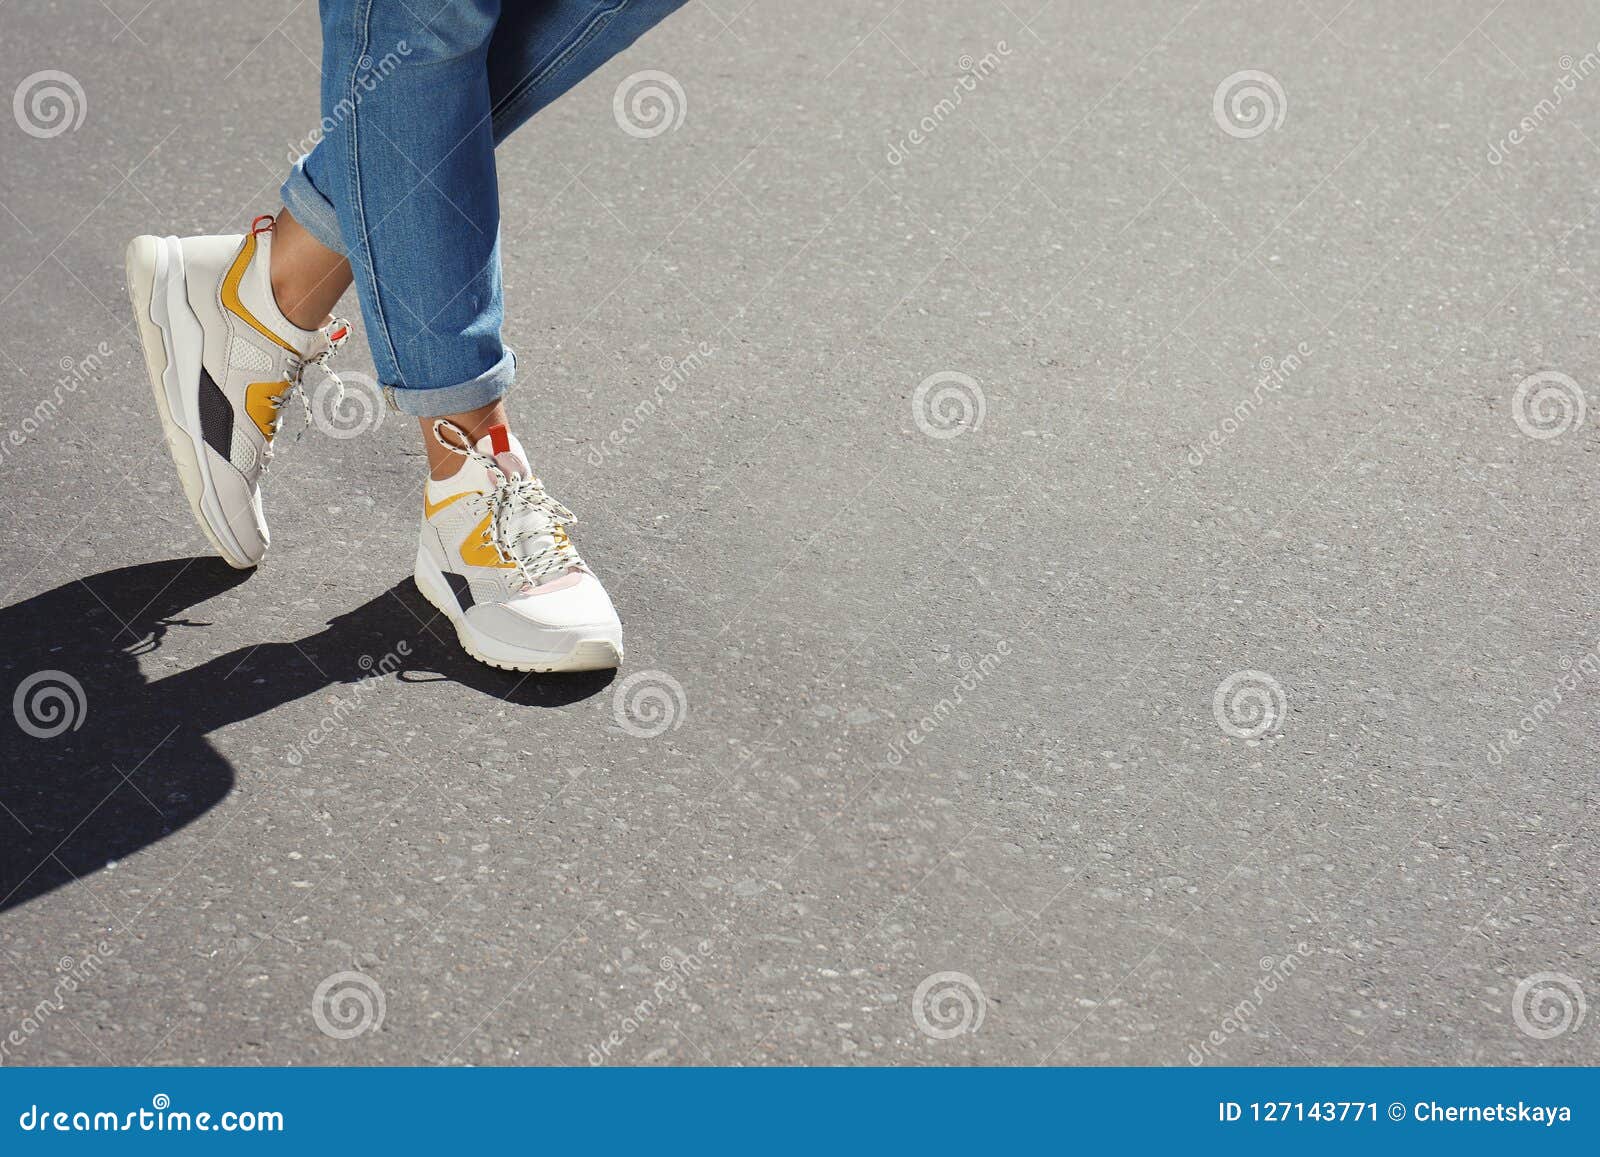 Woman in Stylish Sneakers Walking Outdoors, Focus on Legs. Stock Image ...